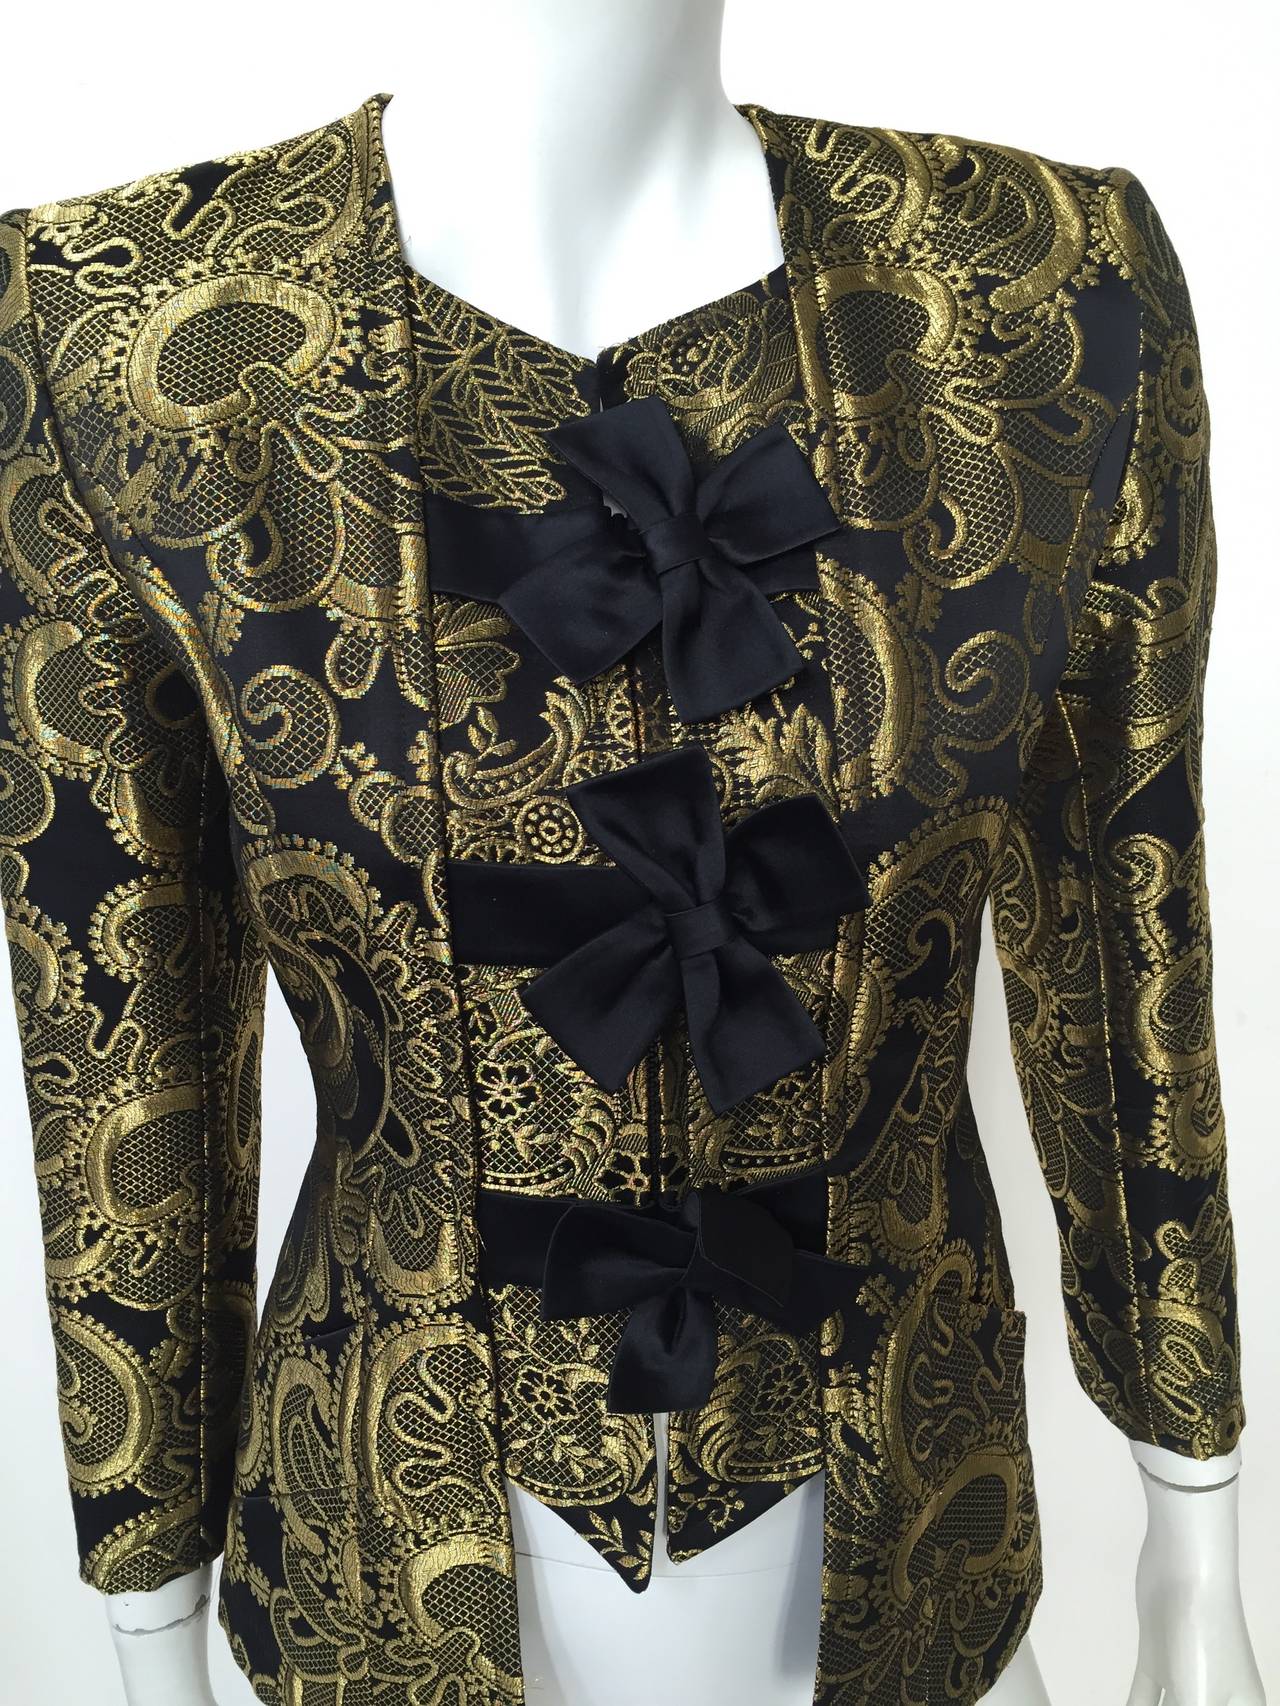 Christian Lacroix 80s gold brocade evening zipper jacket with 3 black bows and front pockets. Made in France size 36 or size 6 USA. Please see measurements.
This jacket would look amazing with your vintage YSL tuxedo pants.
Measurements are:
34